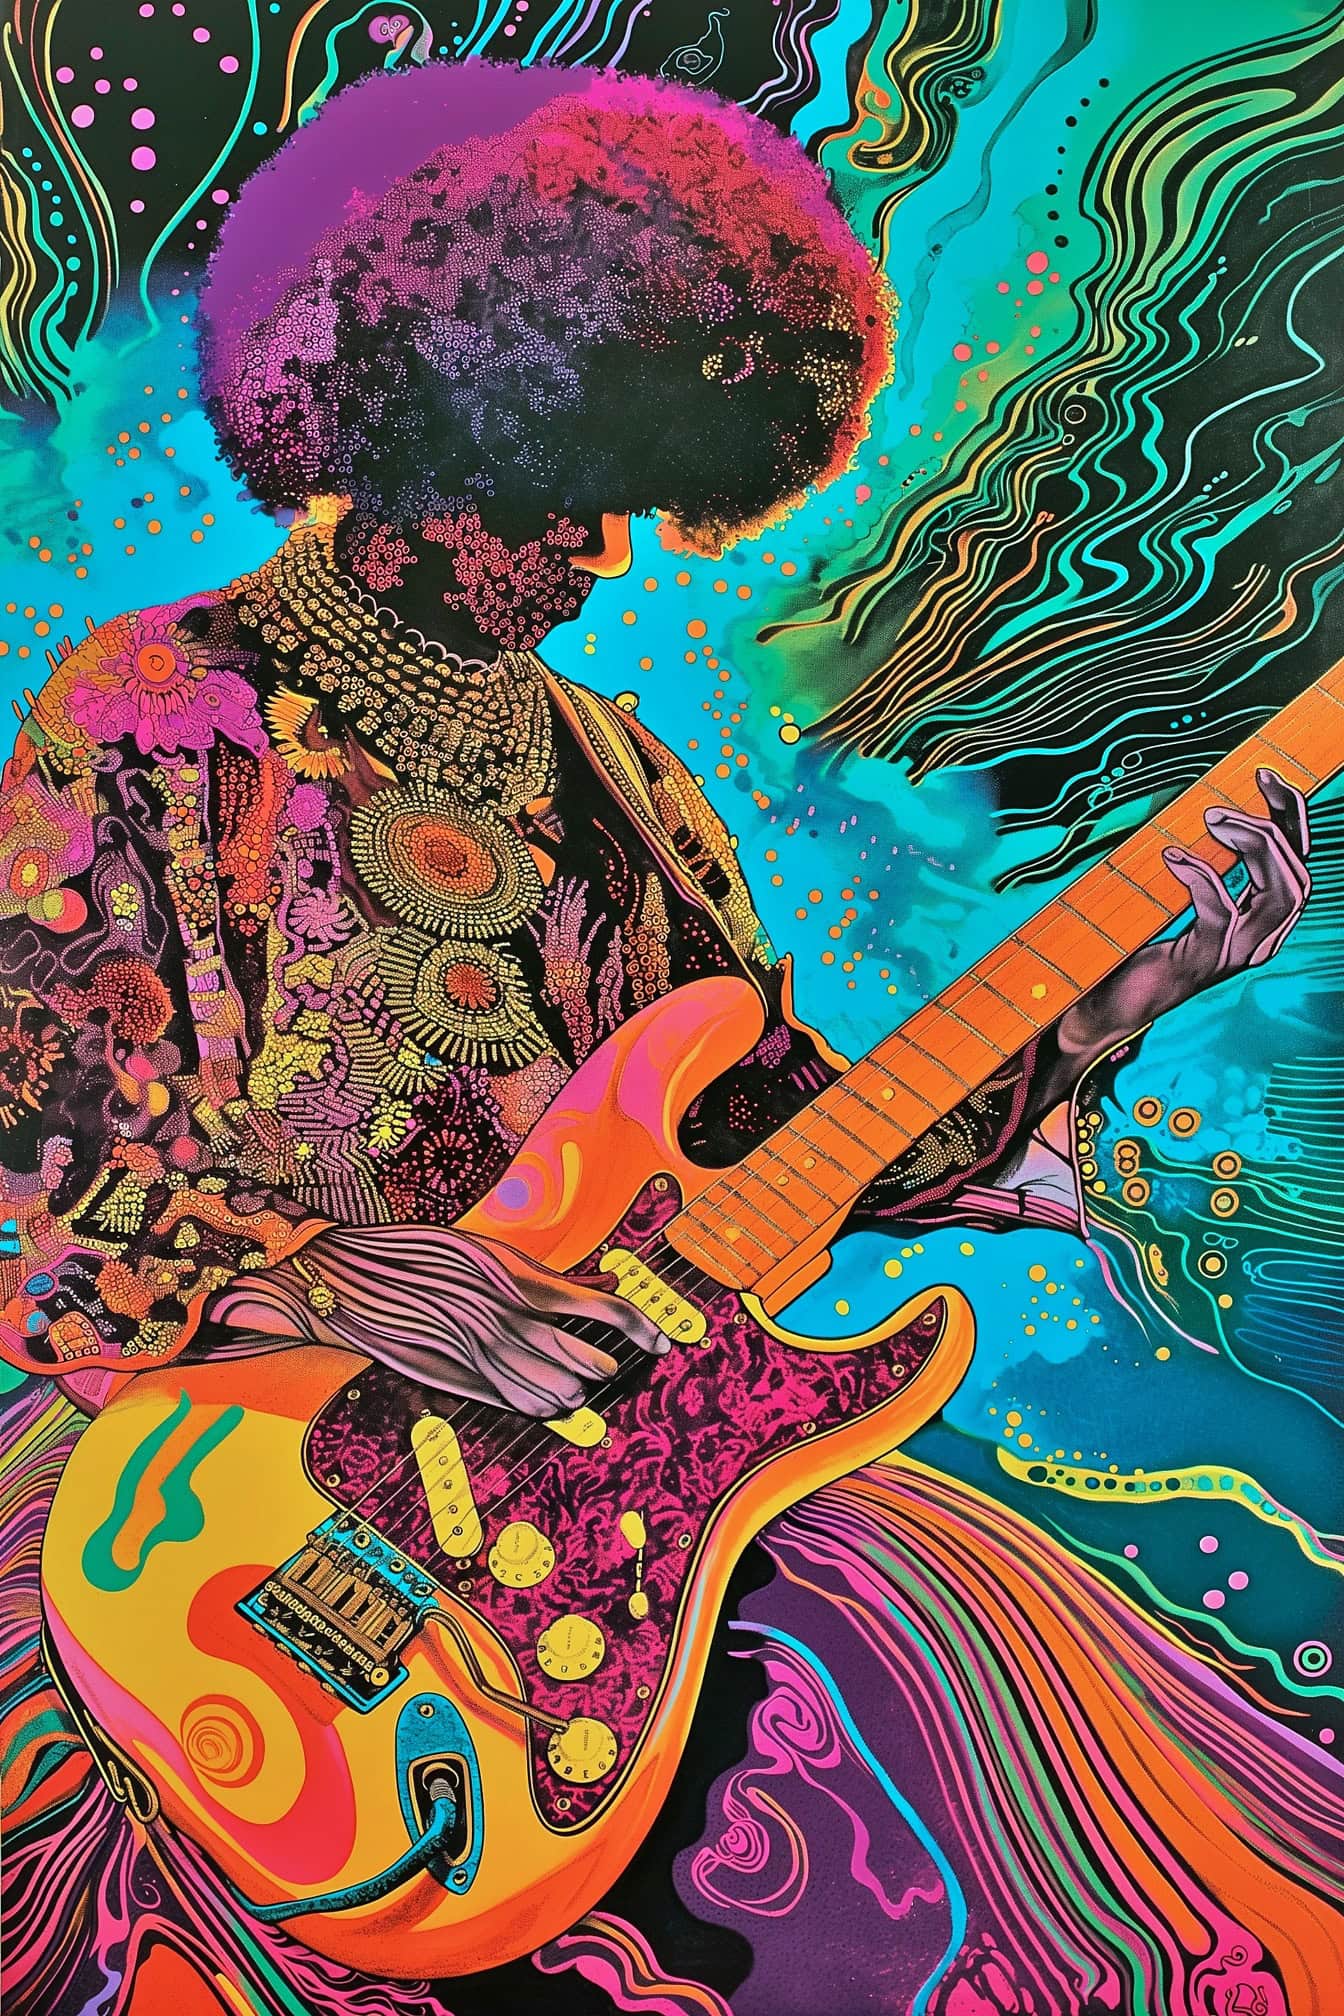 A hypnotic illustration of Jimi Hendrix playing a guitar in a mix of psychedelic and pop art style